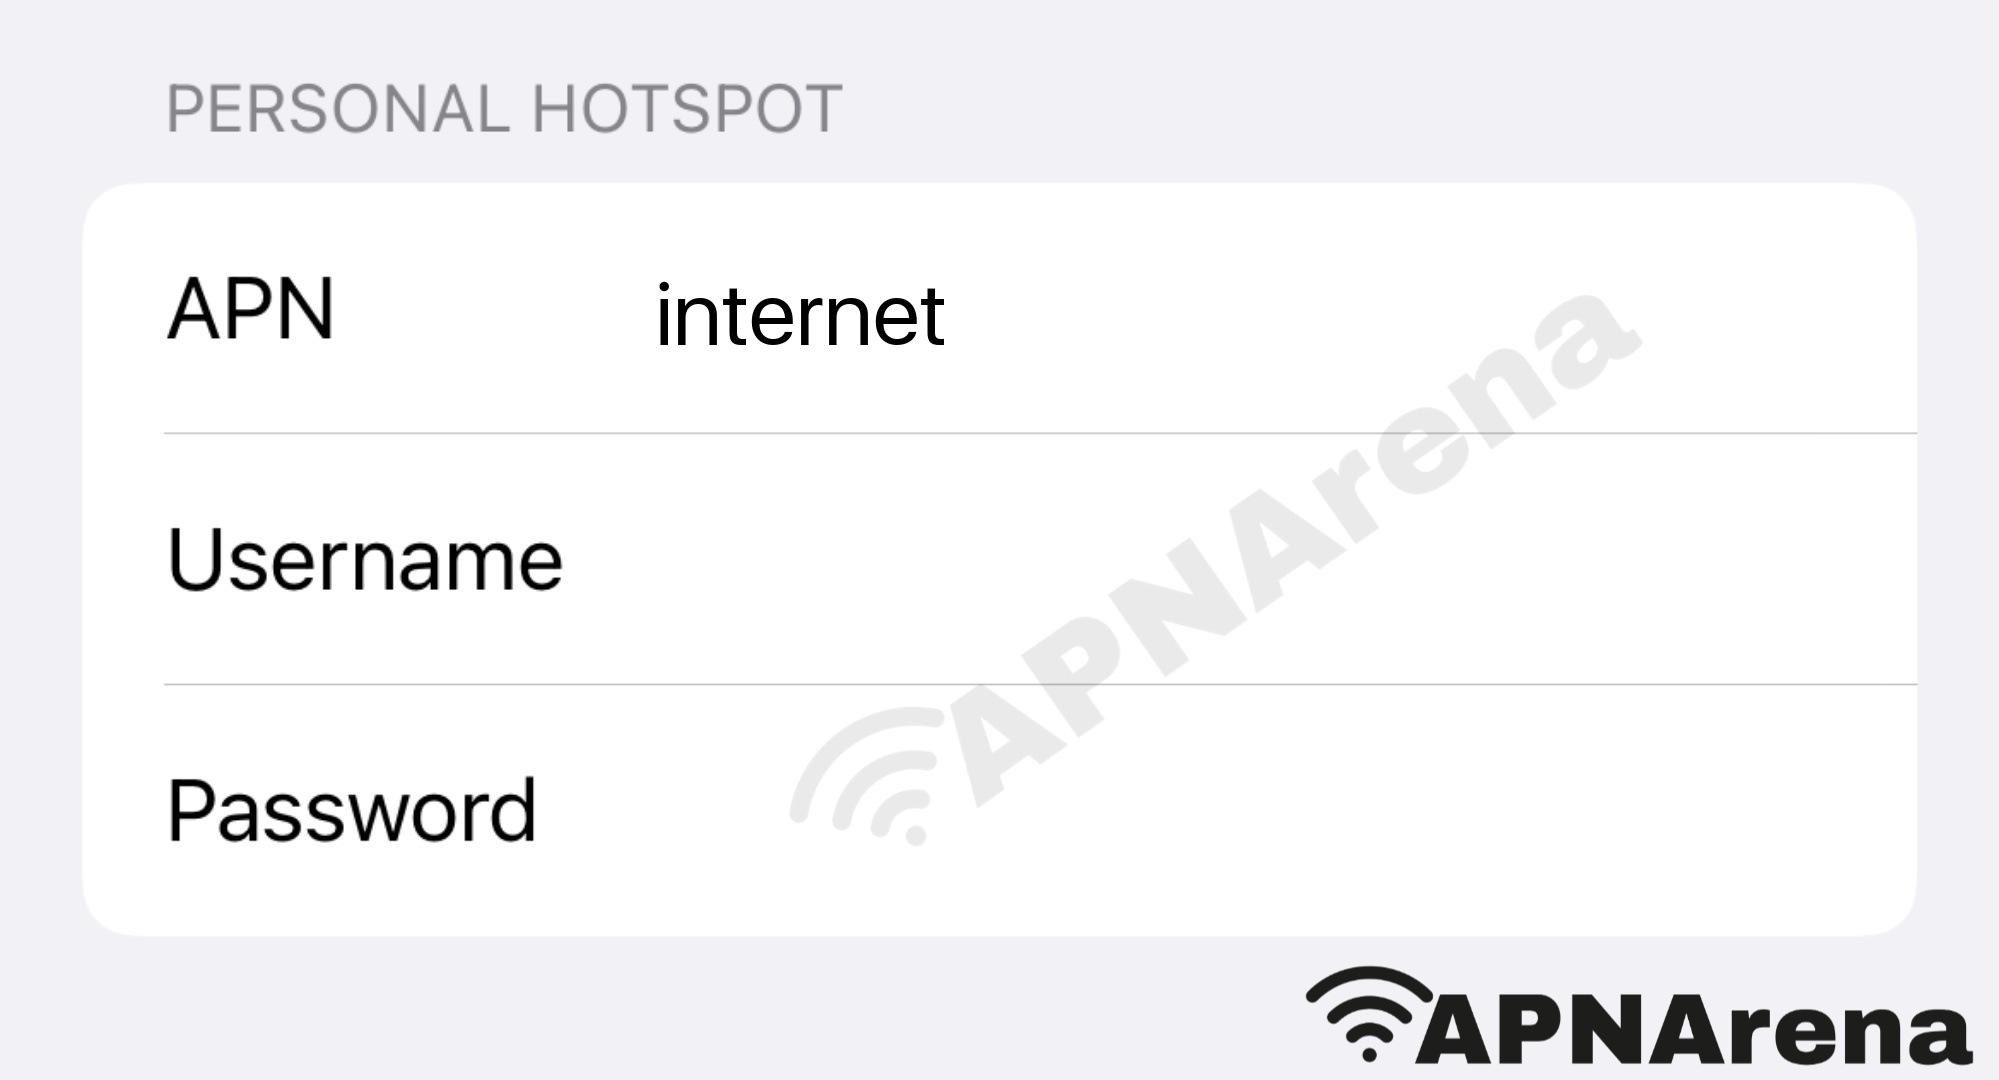 HomeCellular Personal Hotspot Settings for iPhone